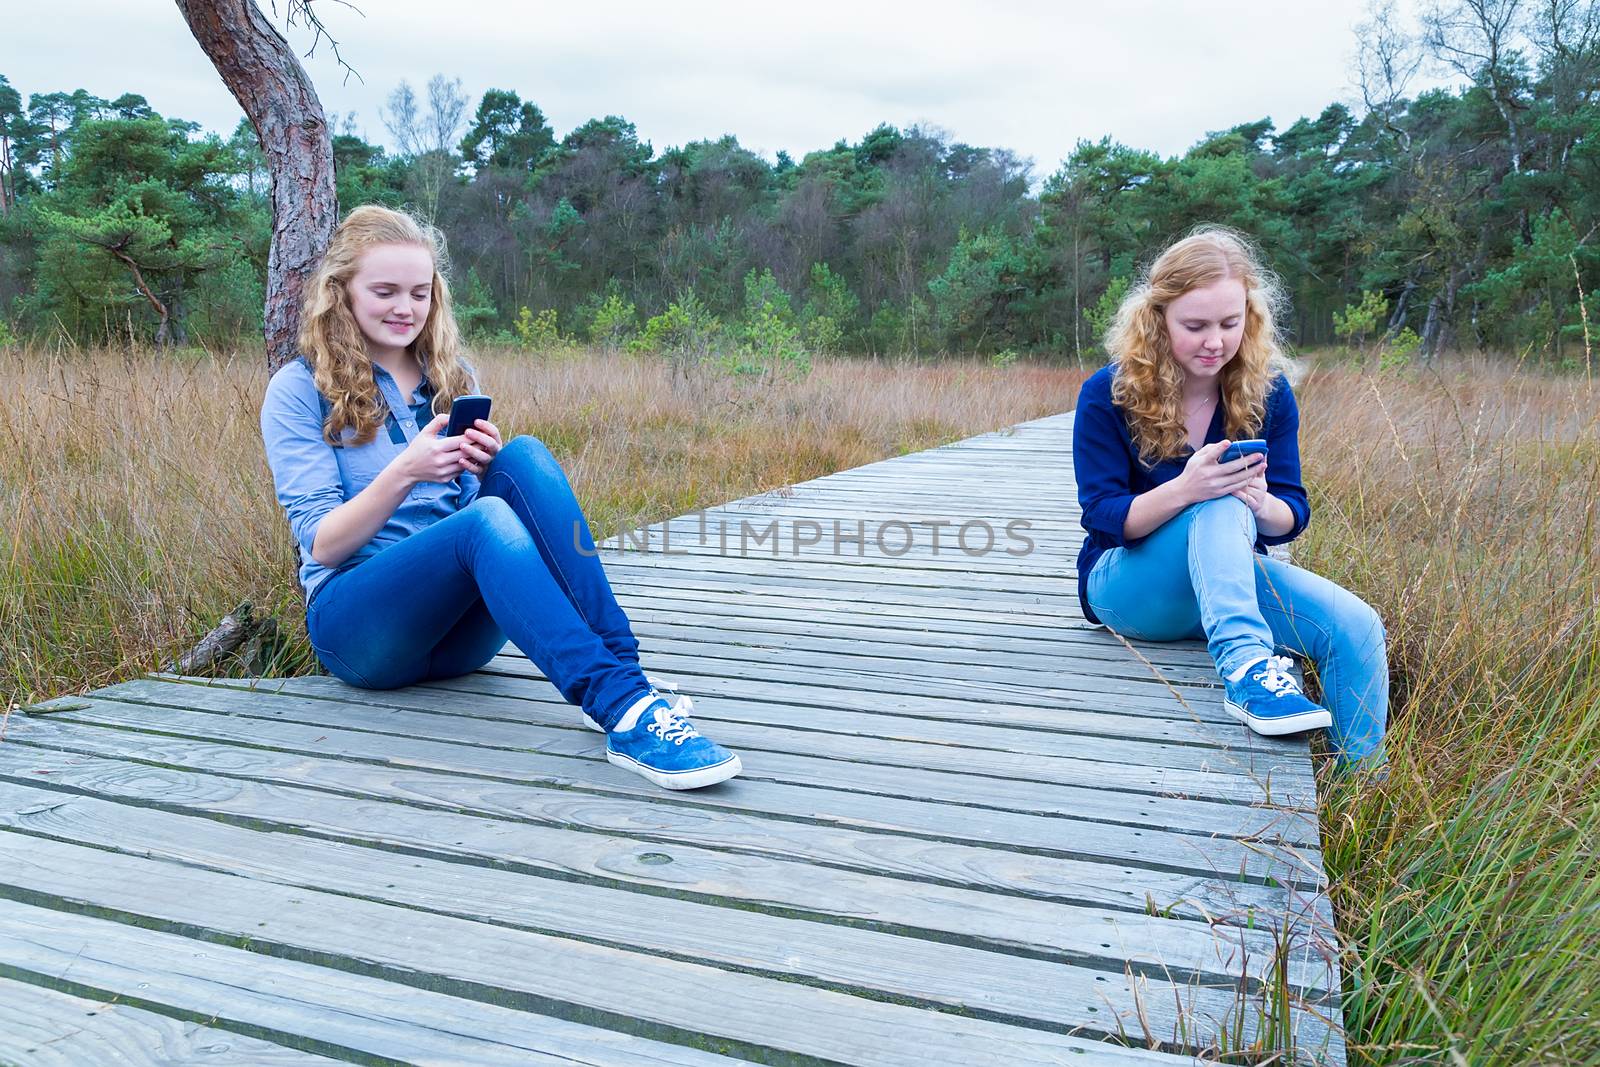 Two caucasian teenage girls operating mobile phones on wooden path in nature